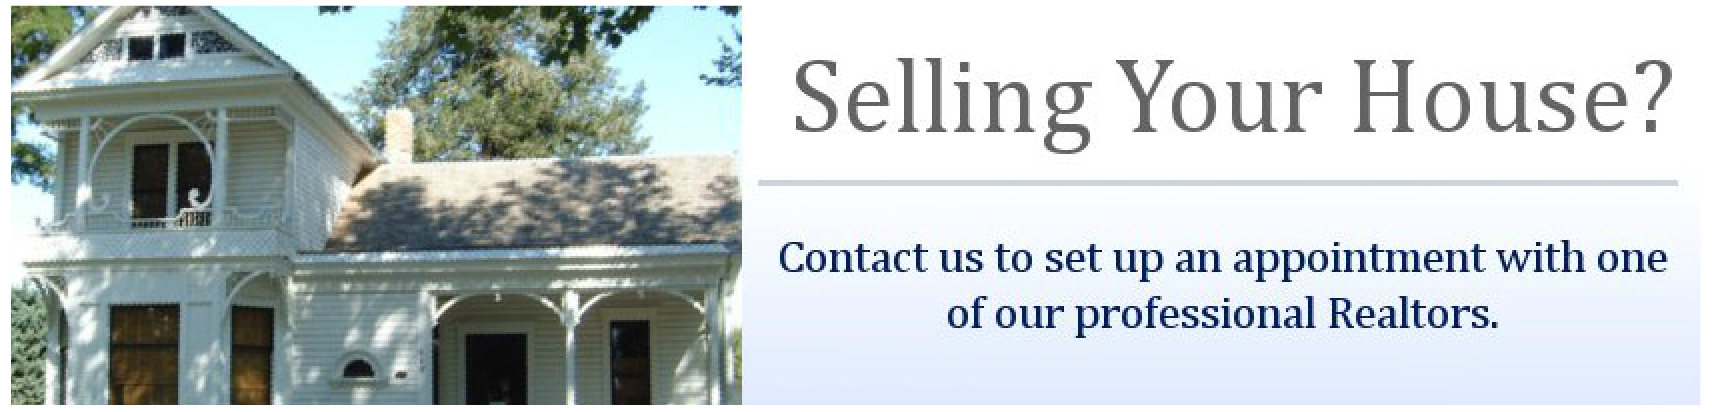 Sell your house in St Marys Kansas with Pearl Real Estate